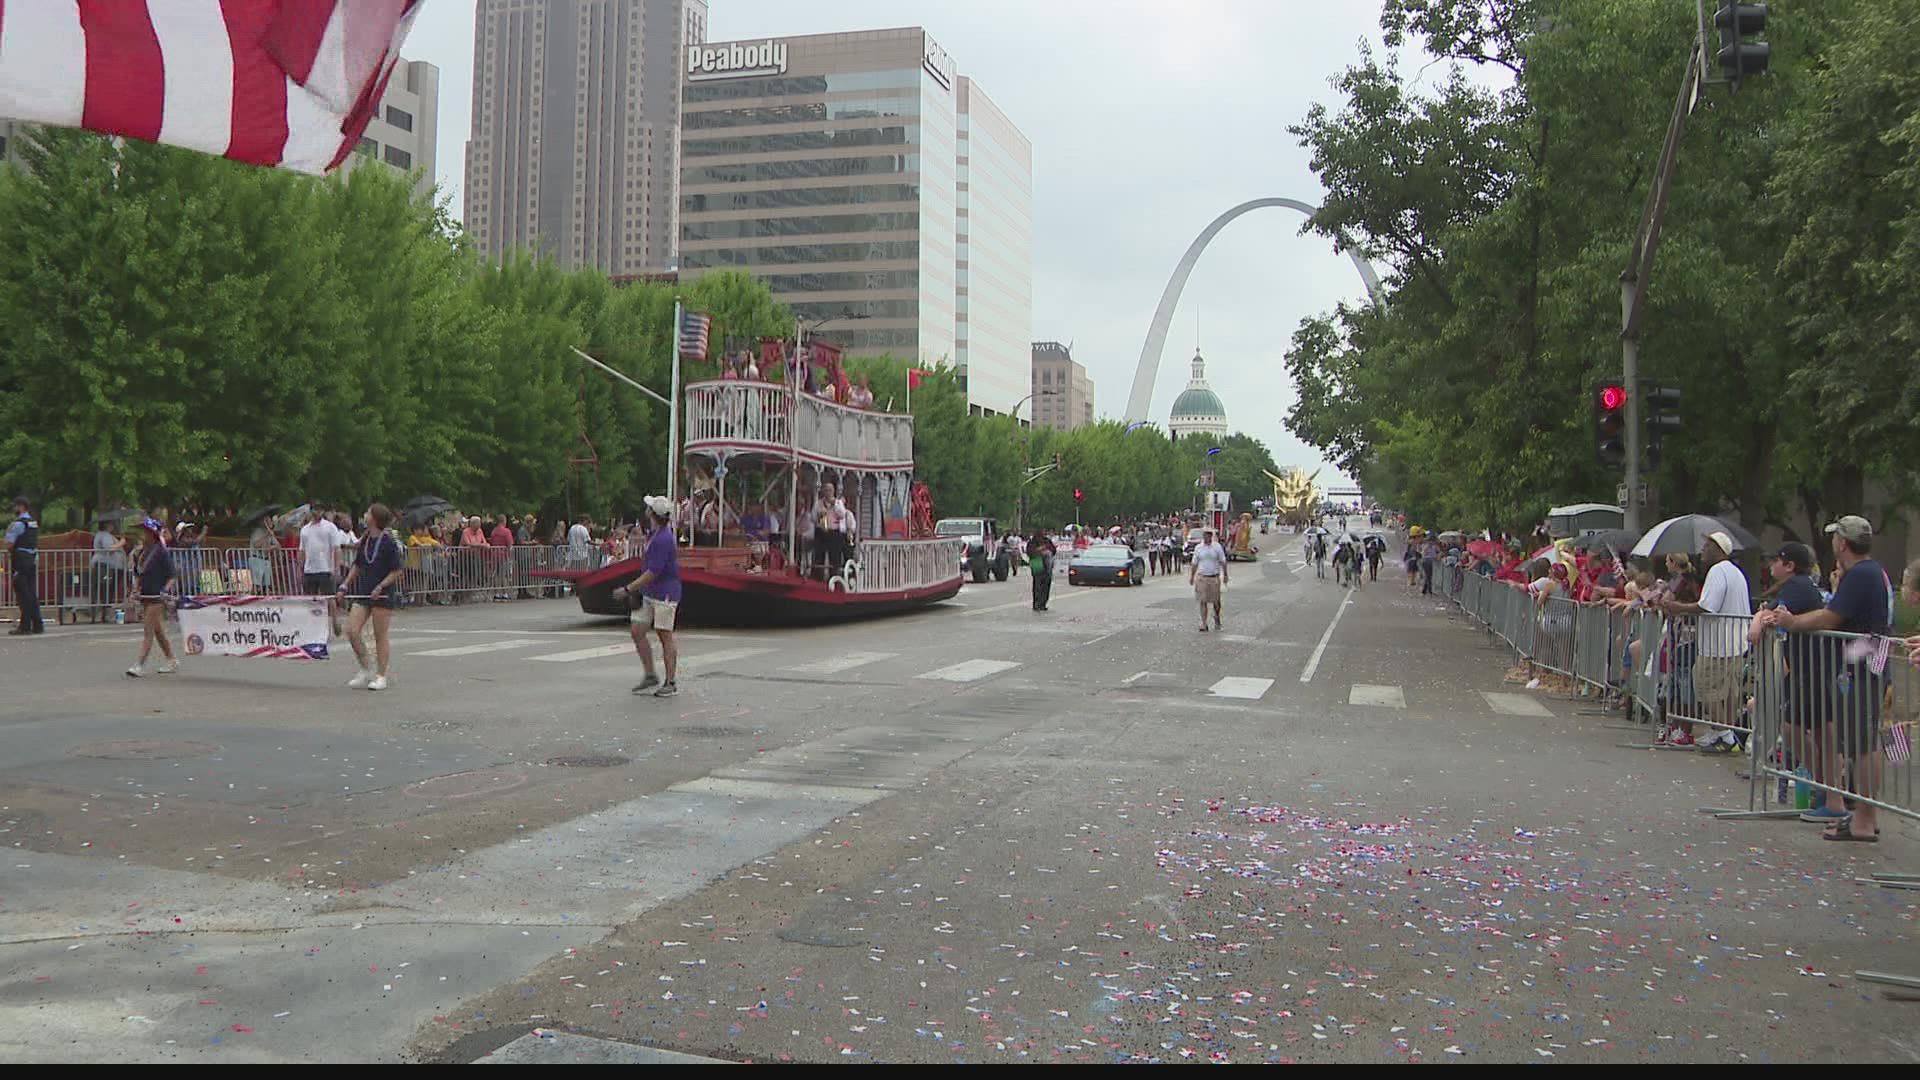 The parade featured performers, floats, balloons and local businesses. They didn't let a little rain ruin their celebration.